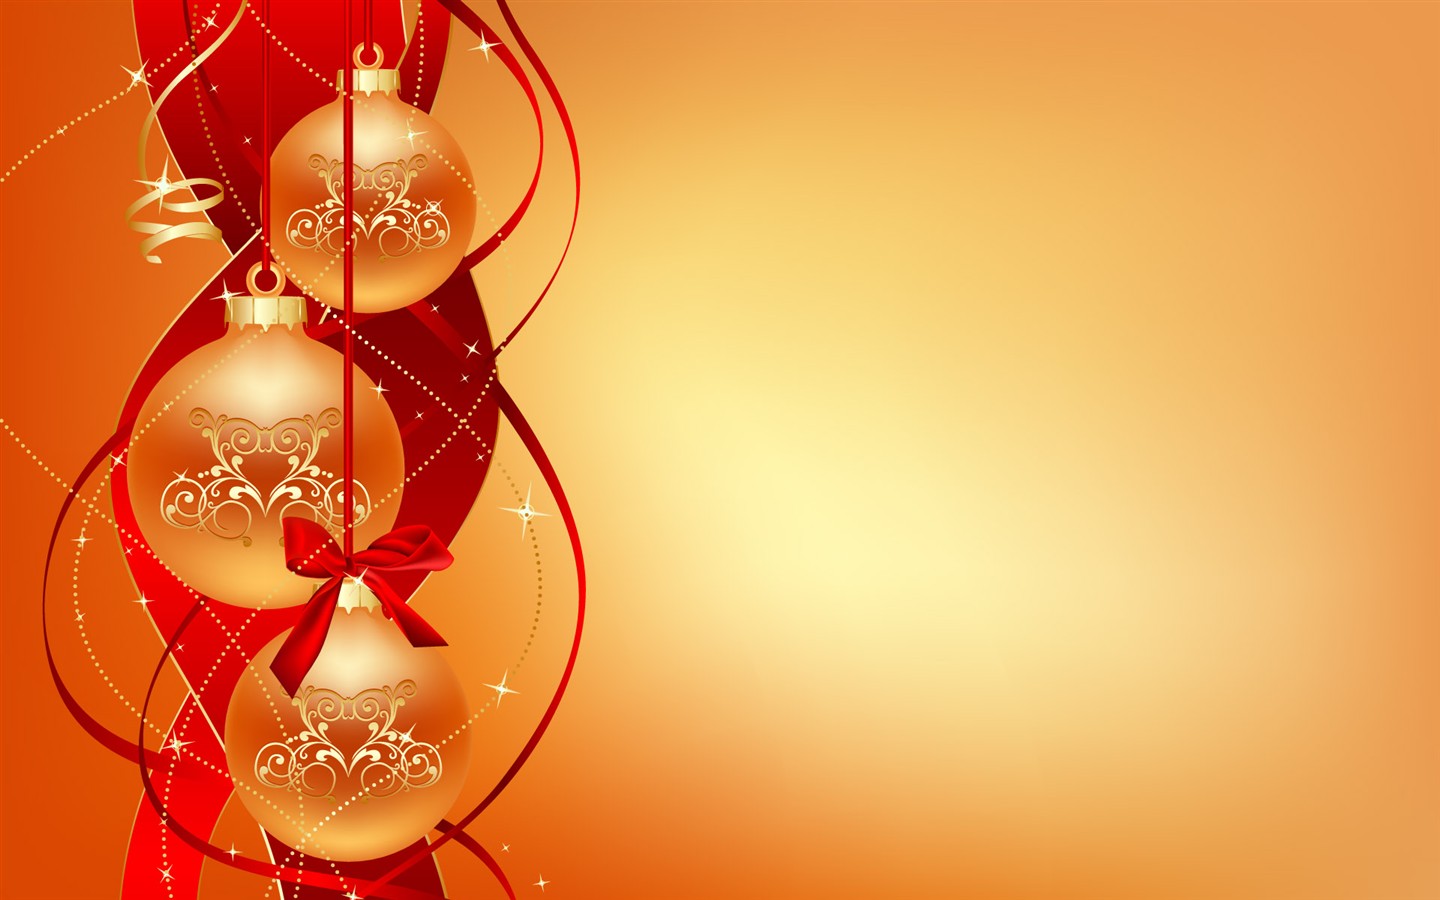 Exquisite Christmas Theme HD Wallpapers #27 - 1440x900